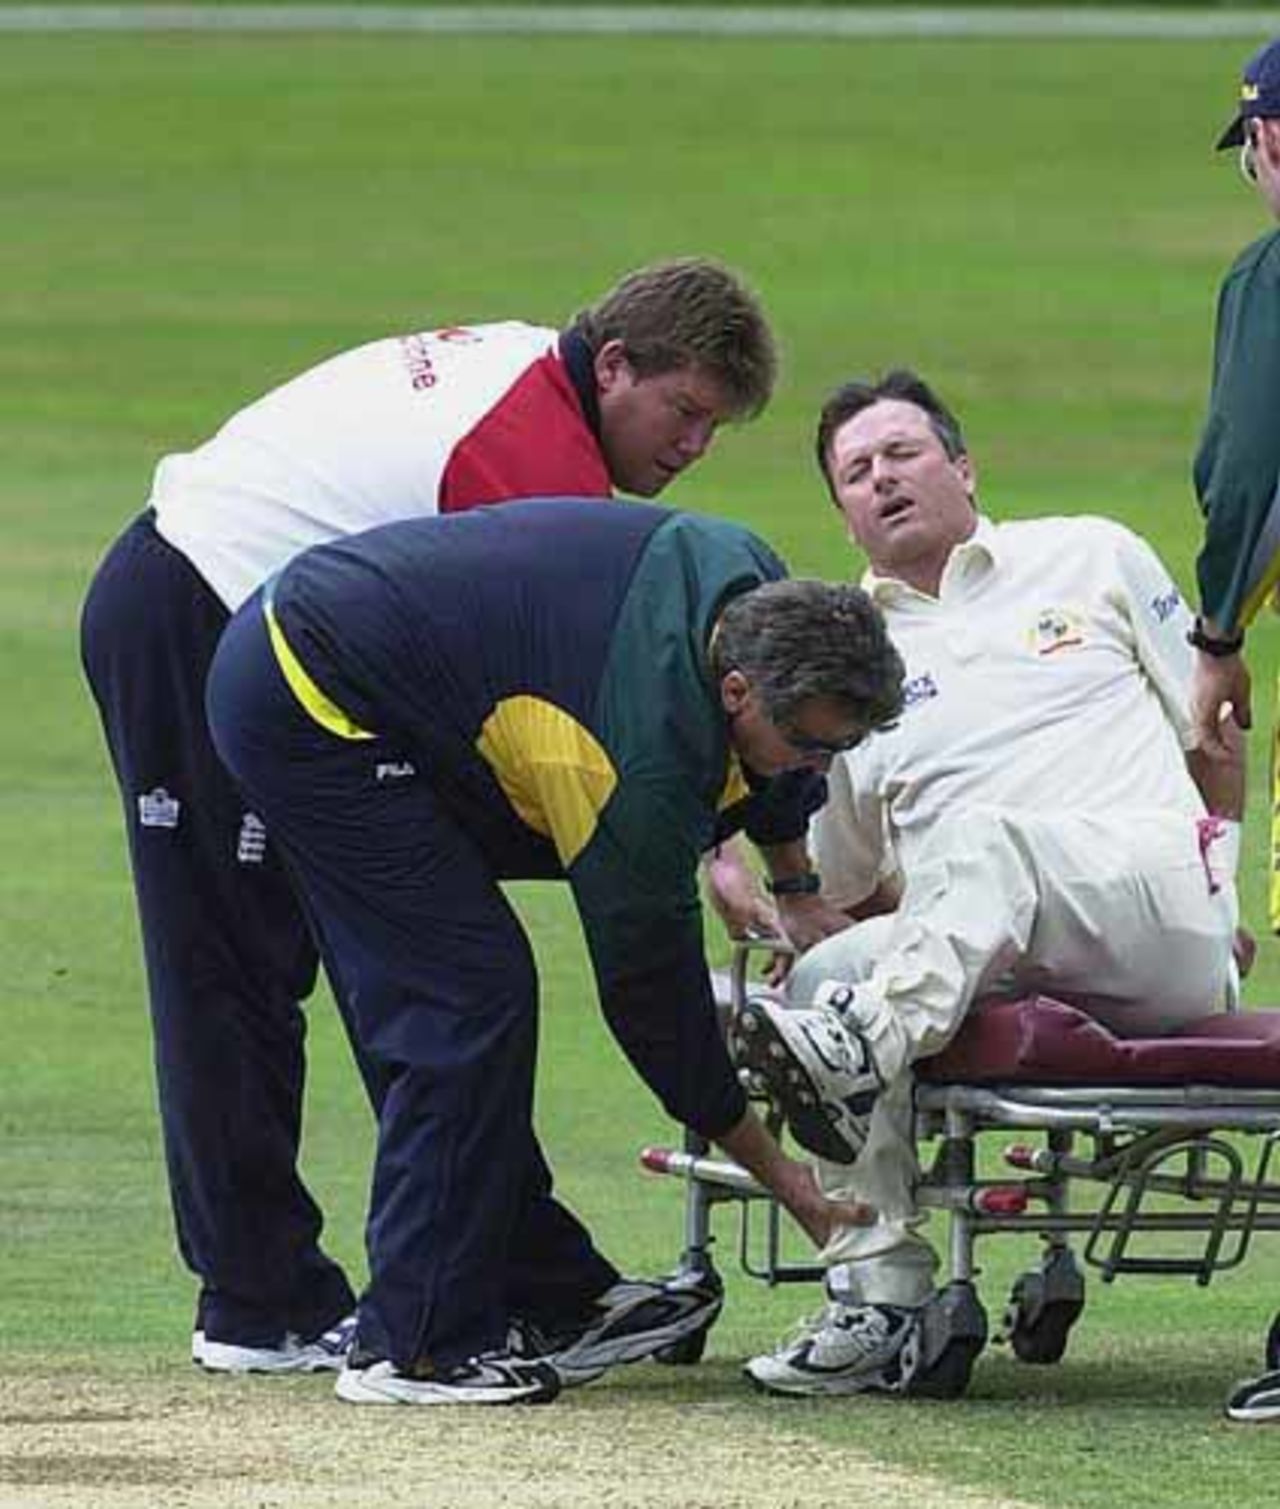 Steve Waugh is loaded on the stretcher to be taken from the field, The Ashes 3rd npower Test, Nottingham, 02-06 Aug 2001